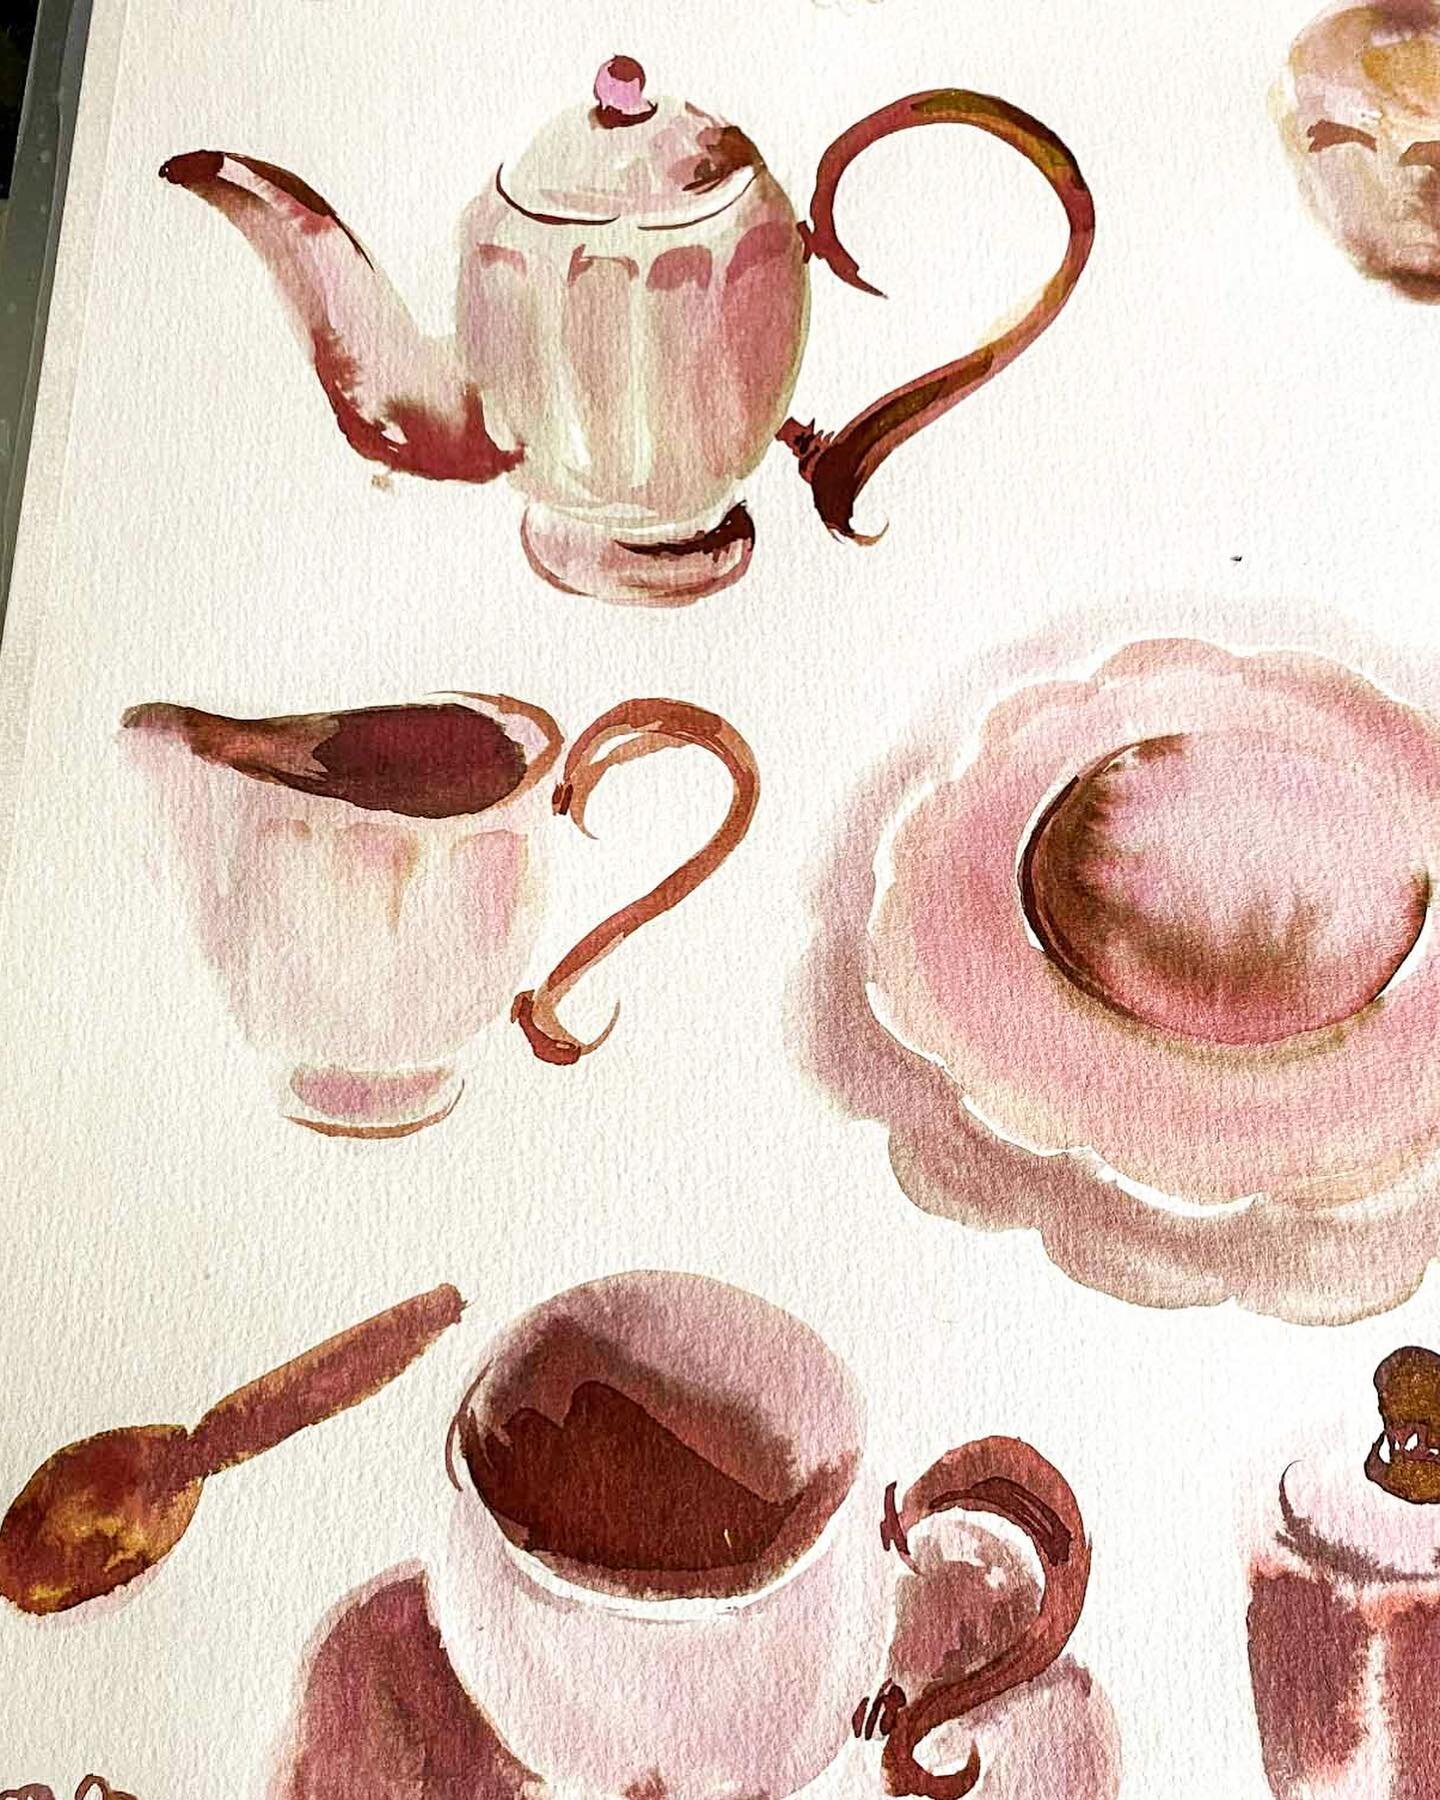 Sunday night on my table&hellip;.a little teaset just waiting to be decorated. Time for some gold detailing I think 😊

#watercolour #watercolor #loosewatercolor #loosewatercolour #loosewatercolours #watercolourillustration #watercolourillustrations 